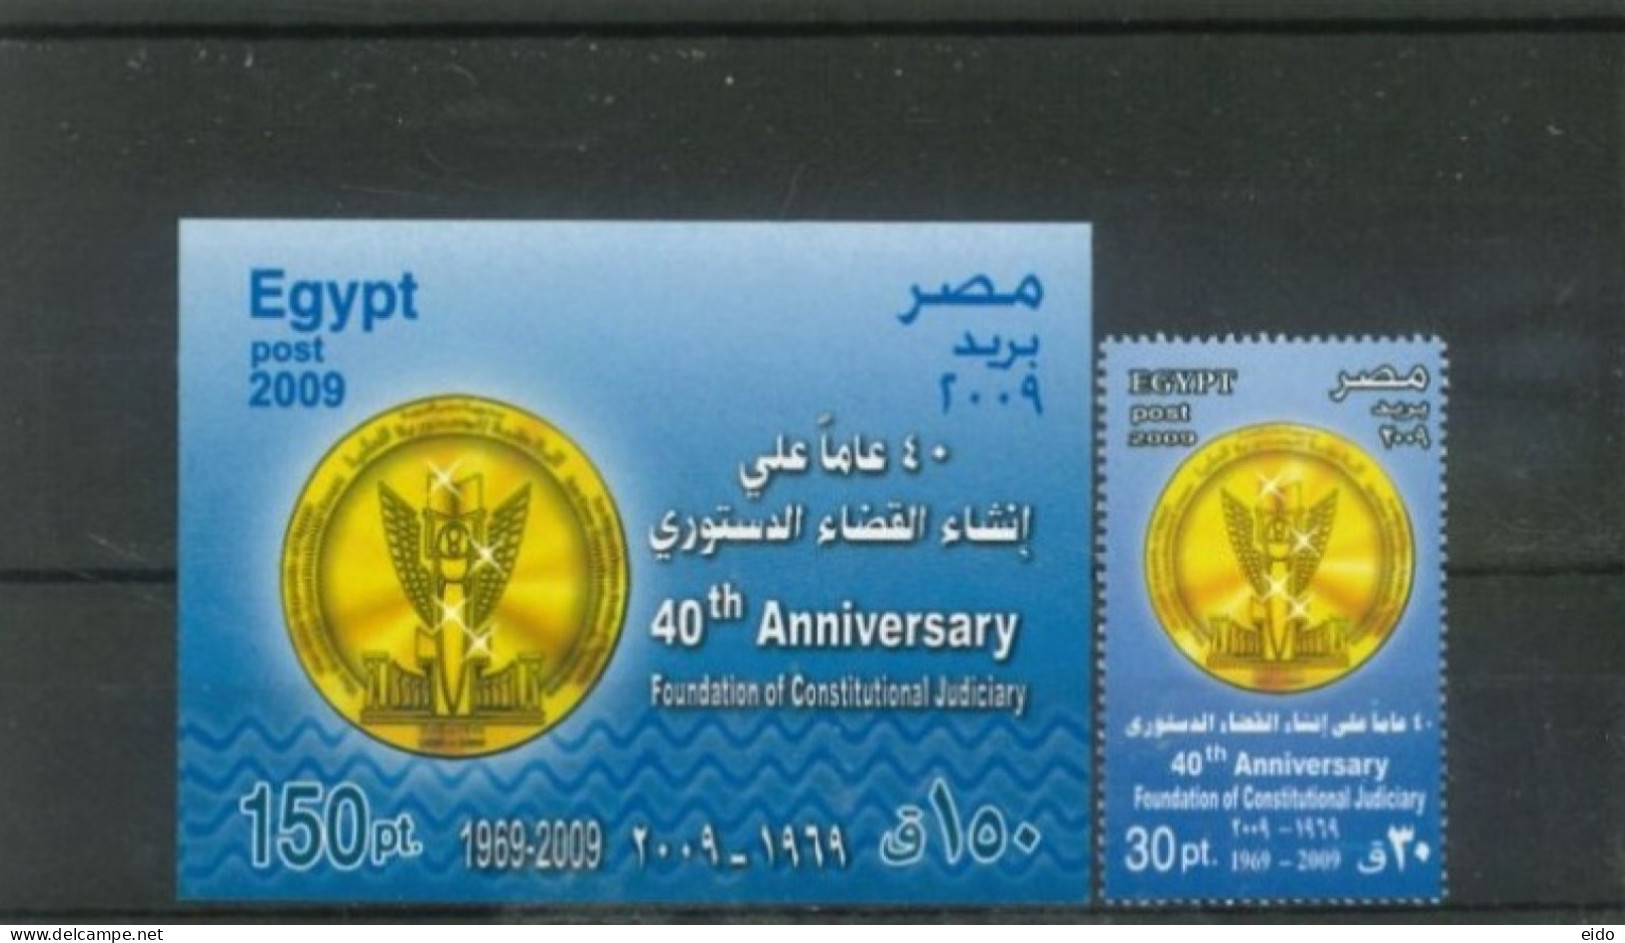 EGYPT - 2009, 40th ANNIVERSARY FOUNDATION OF CONSTITUTIONAL JUDICIARY MINIATURE STAMP SHEET & STAMP, UMM (**). - Lettres & Documents